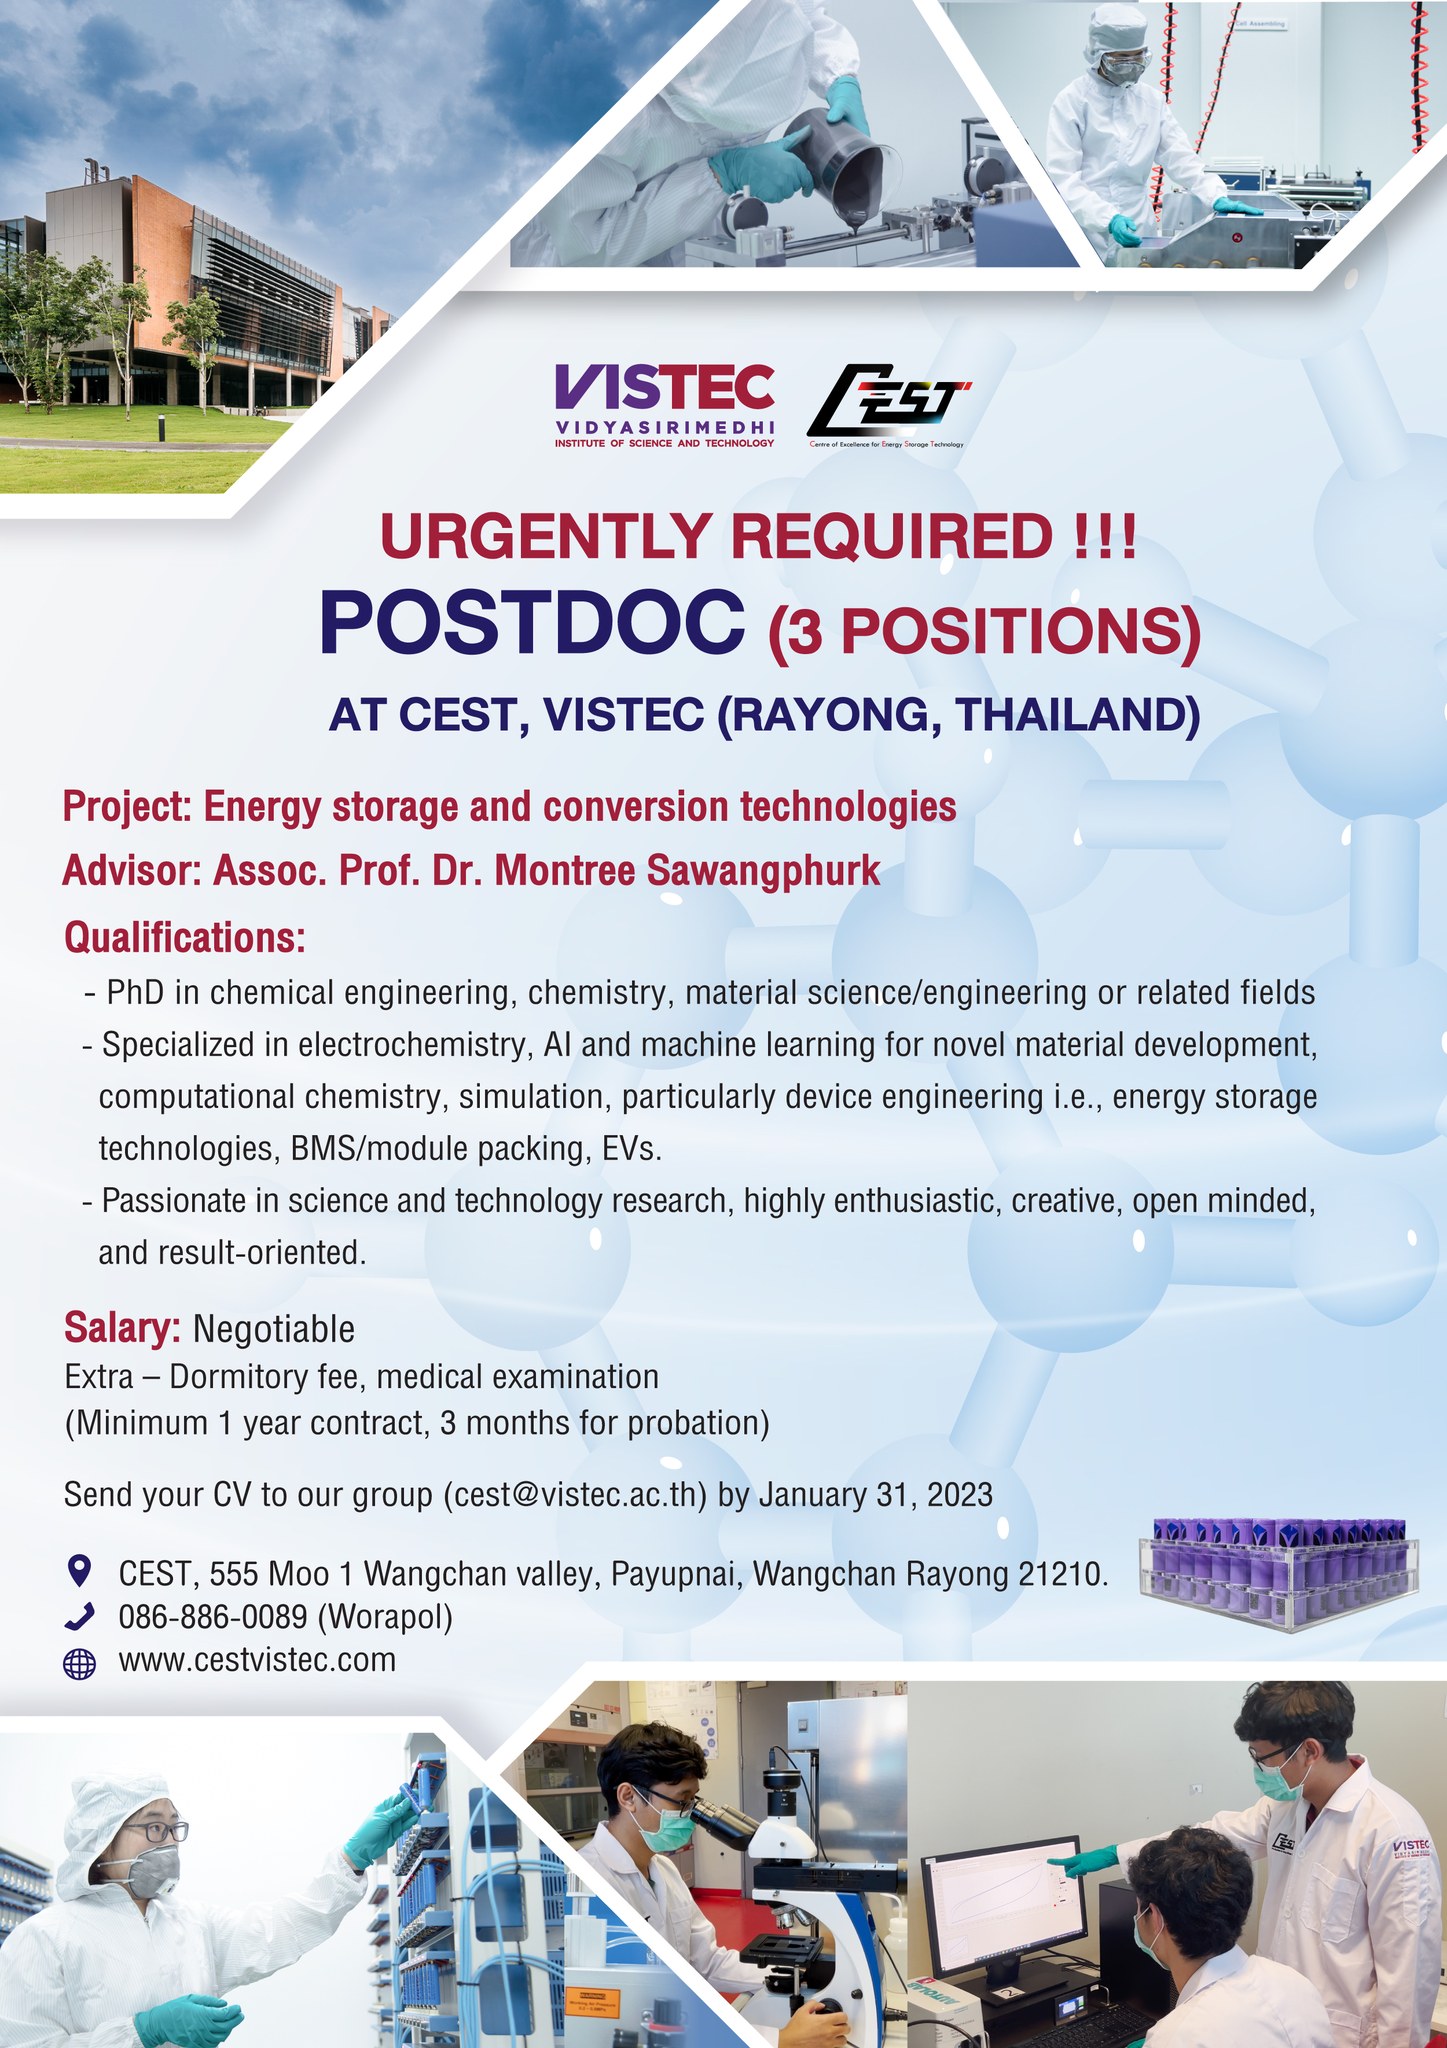 Apply now for 3 Postdoc positions at CEST, VISTEC (Rayong, Thailand)